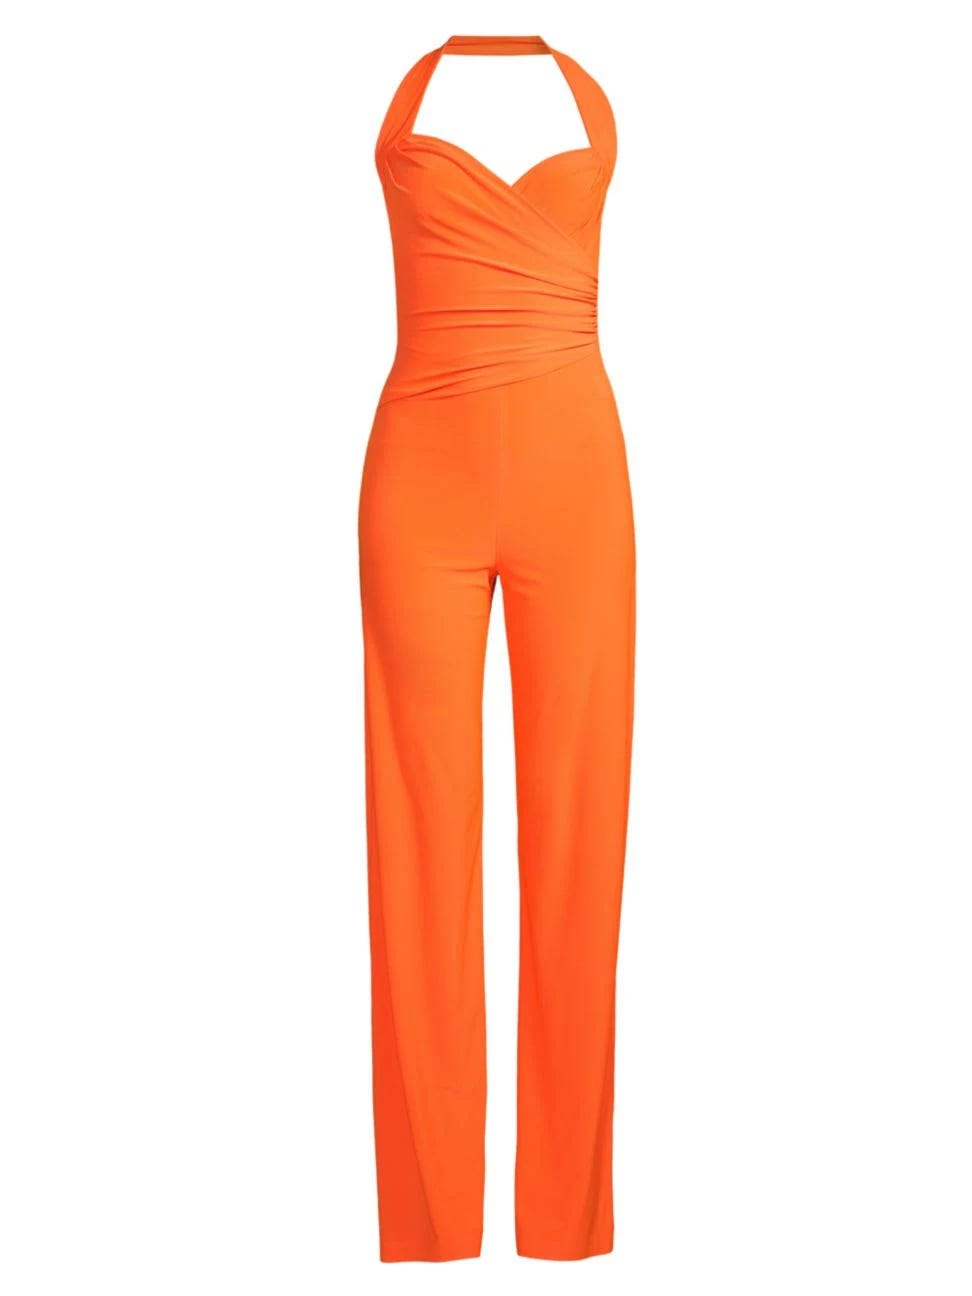 Stylish Jumpsuit in Orange with Ruching Detail | Image